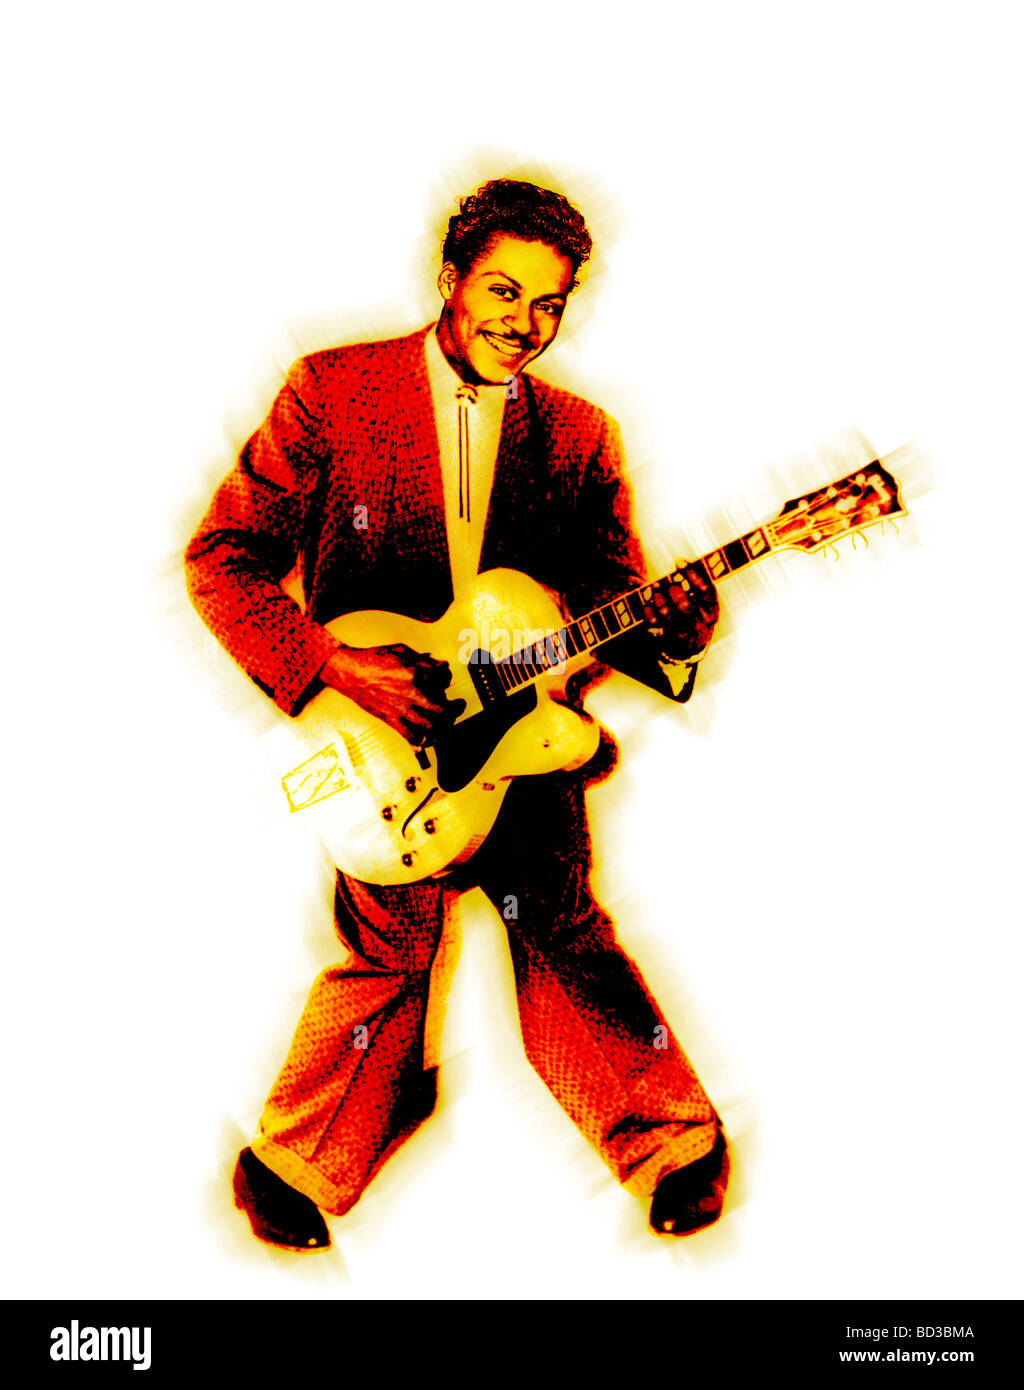 CHUCK BERRY  - US rock n roll musician about 1957. Photo: Colors Stock Photo